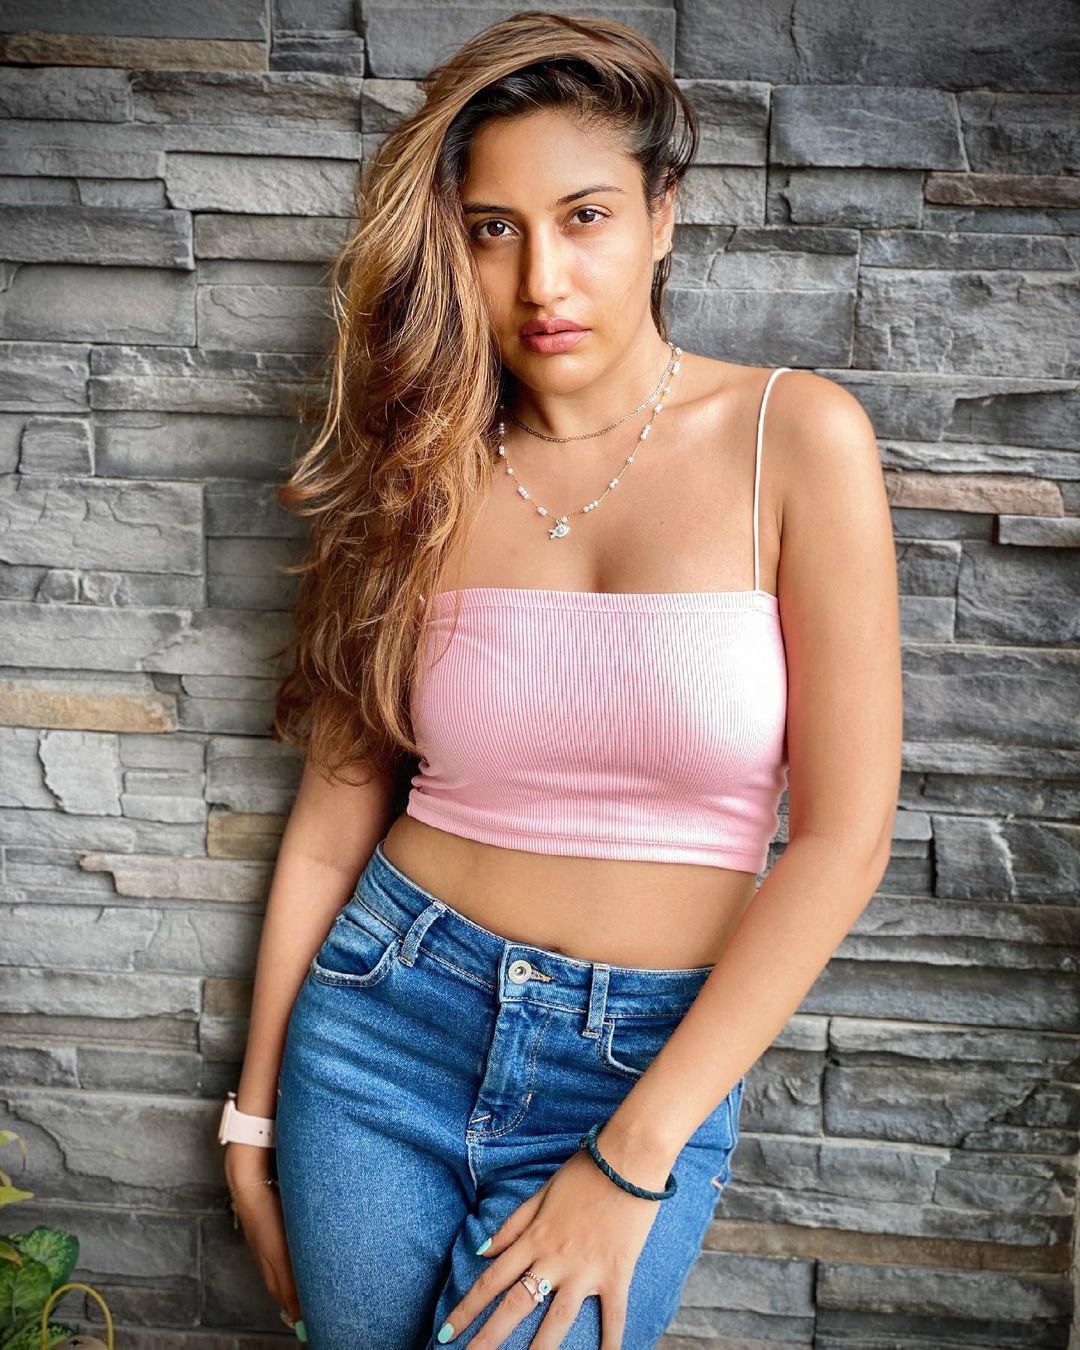  Surbhi Chandna flaunts her figure in the pink tank top and denims. (Image: Instagram)